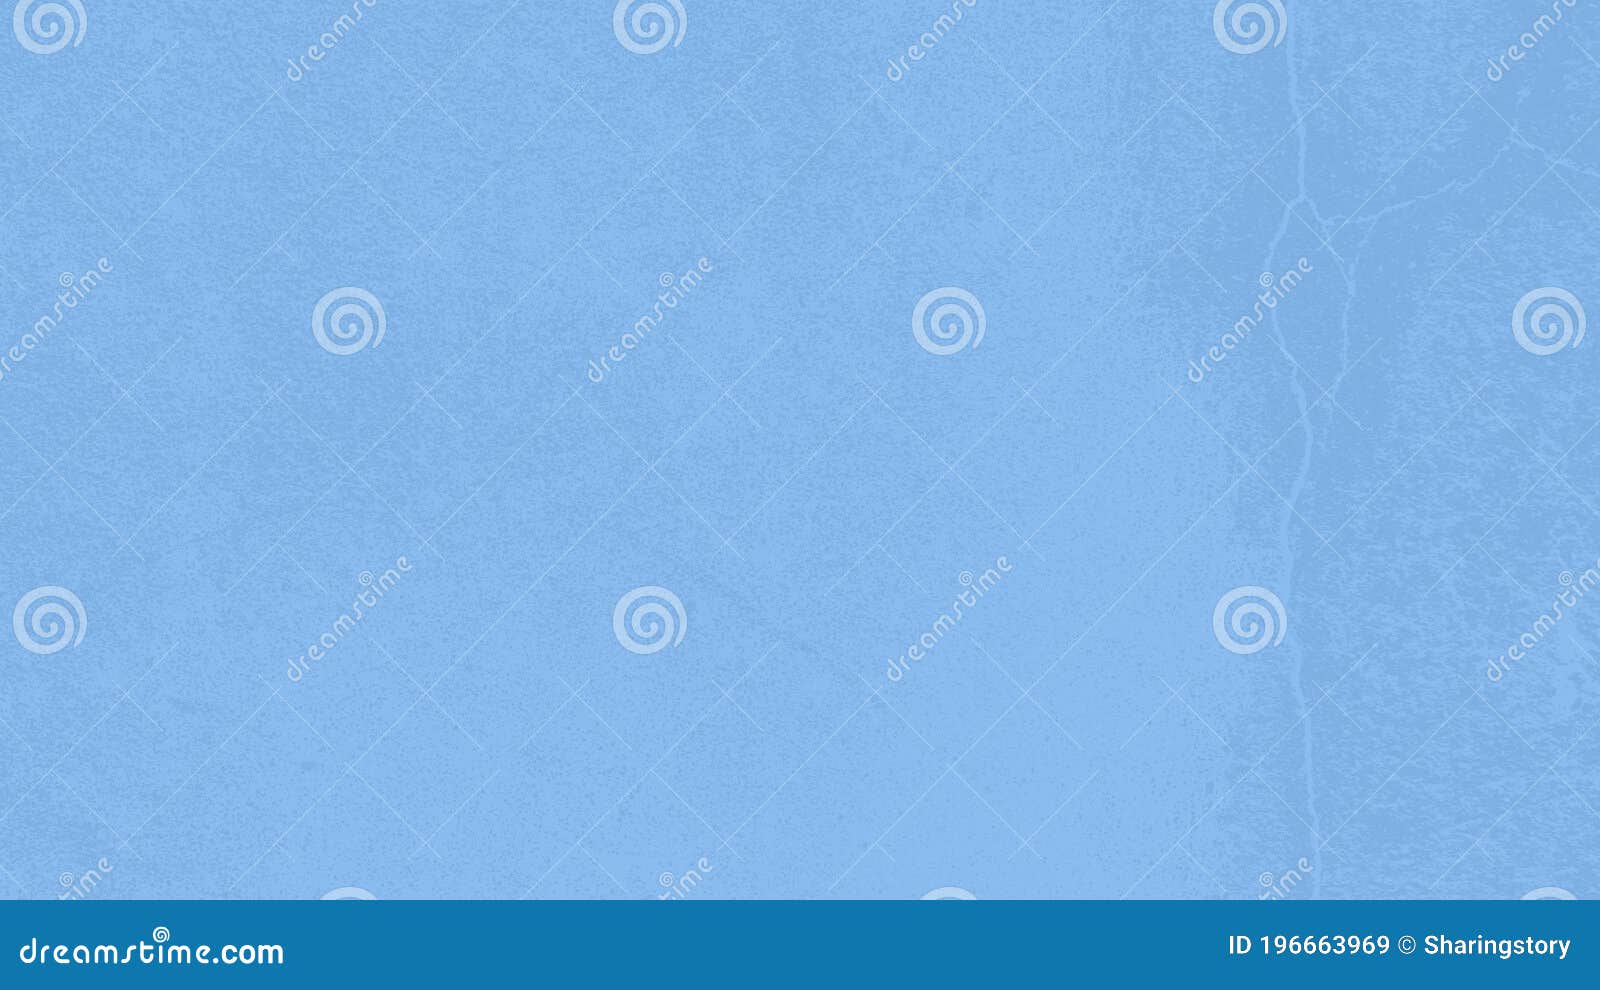 Blue Paper Texture Background Stock Image - Image of wall, background ...